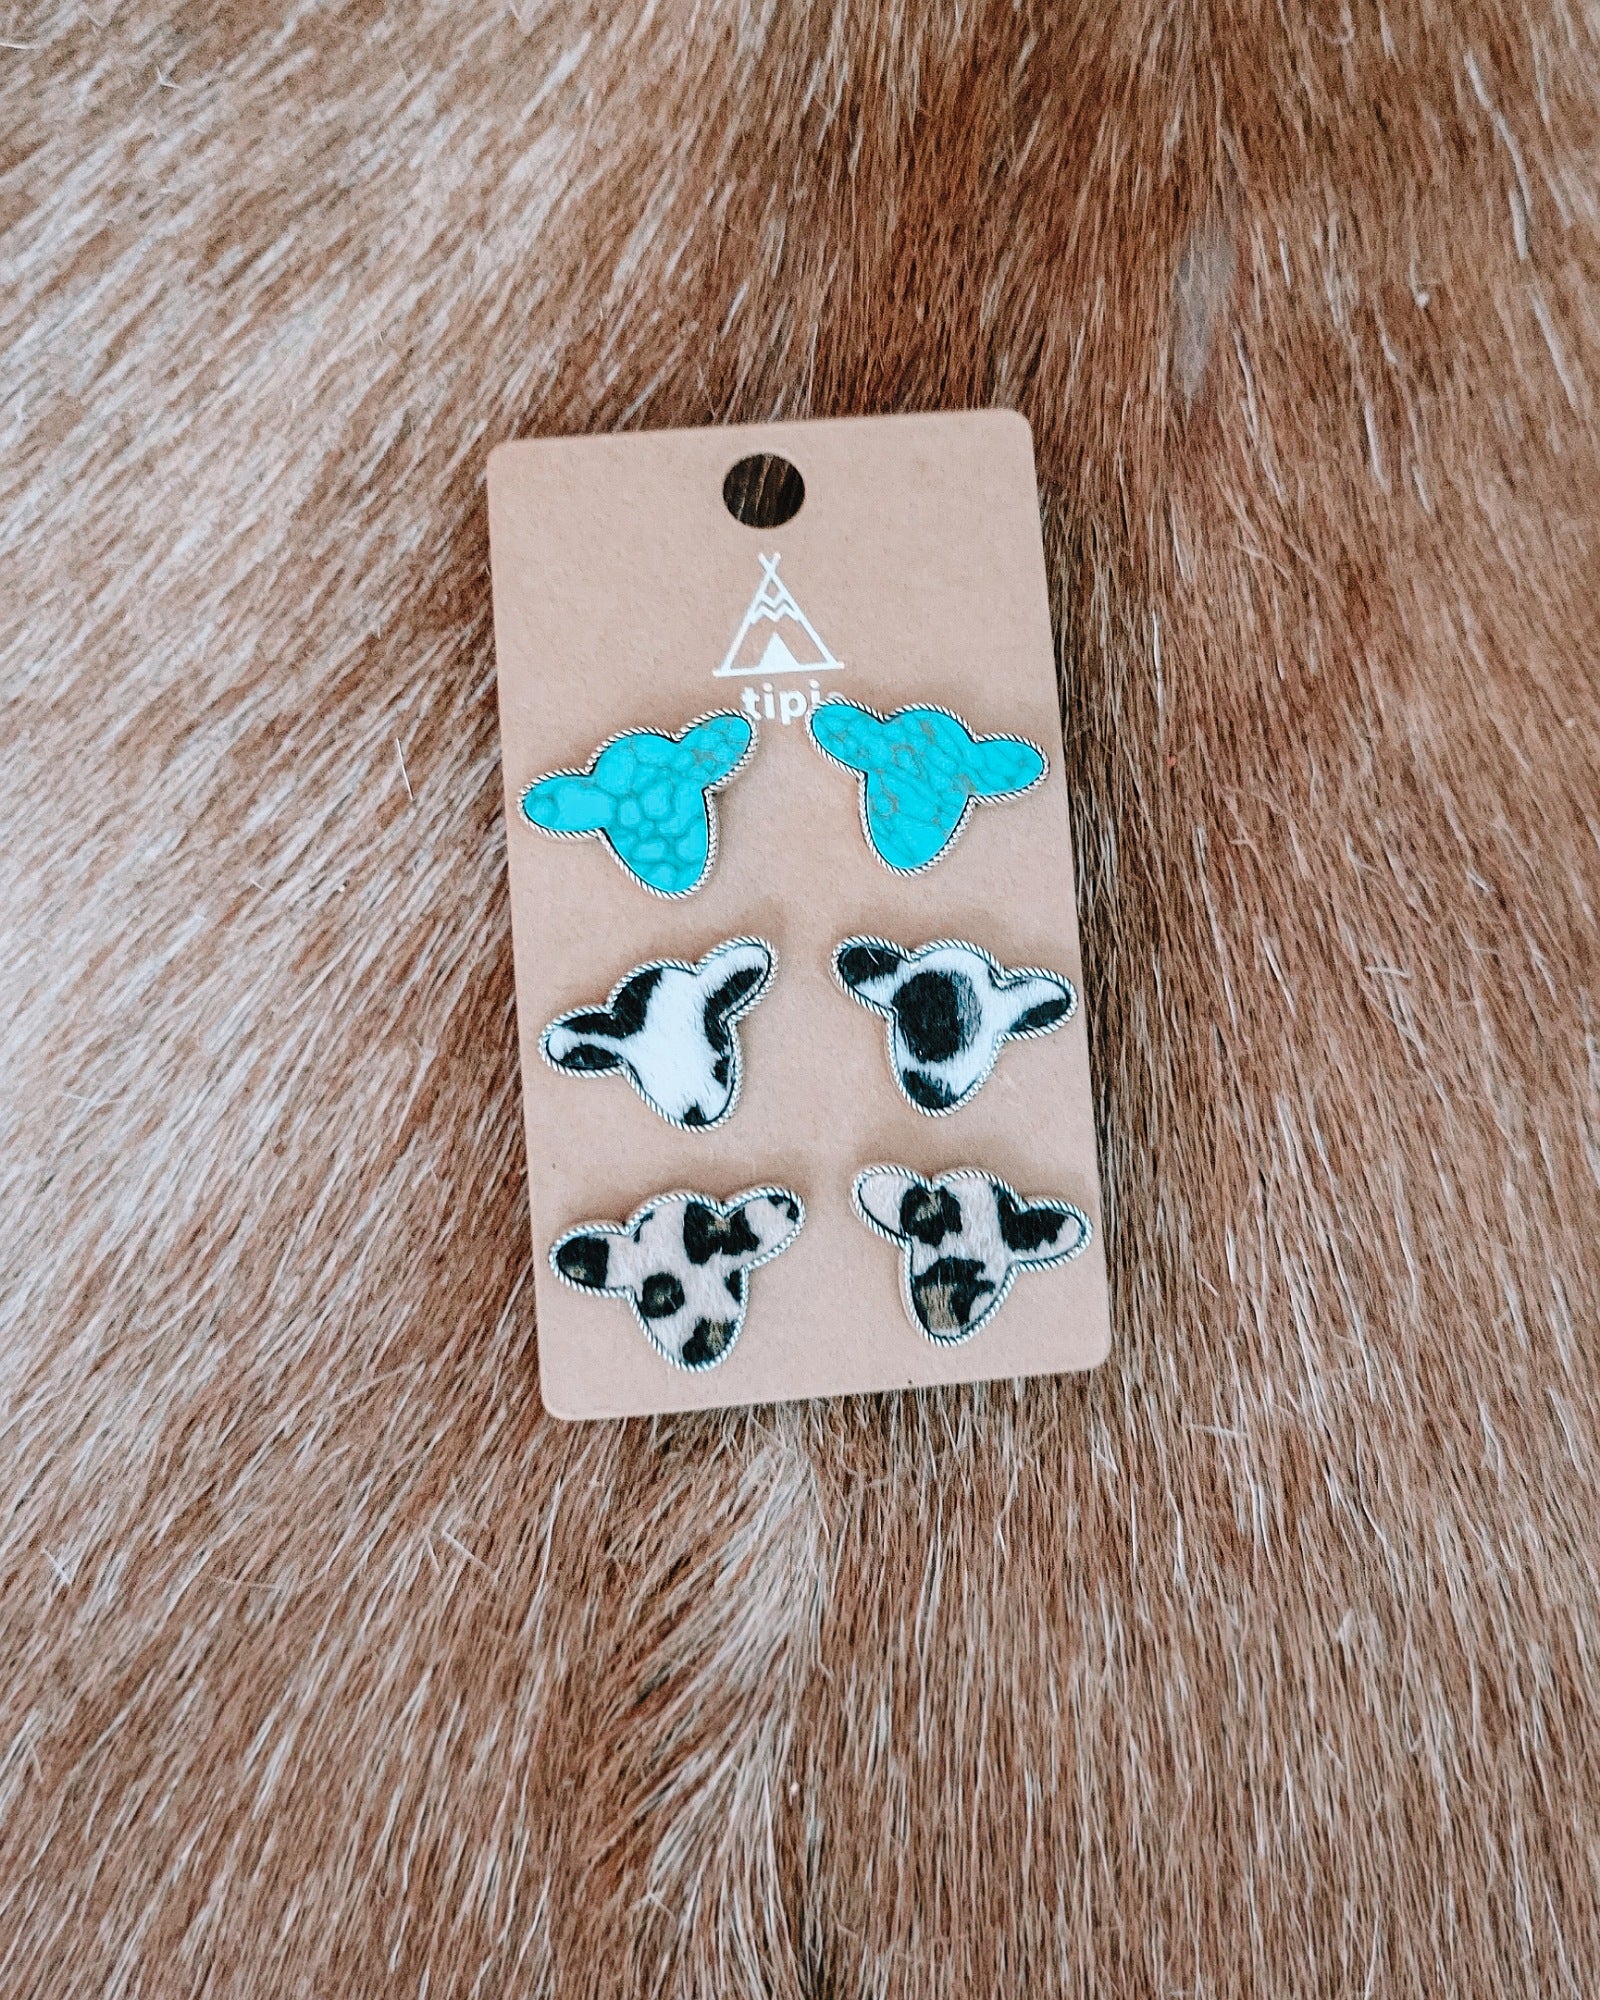 Cows Come Home Earring Set